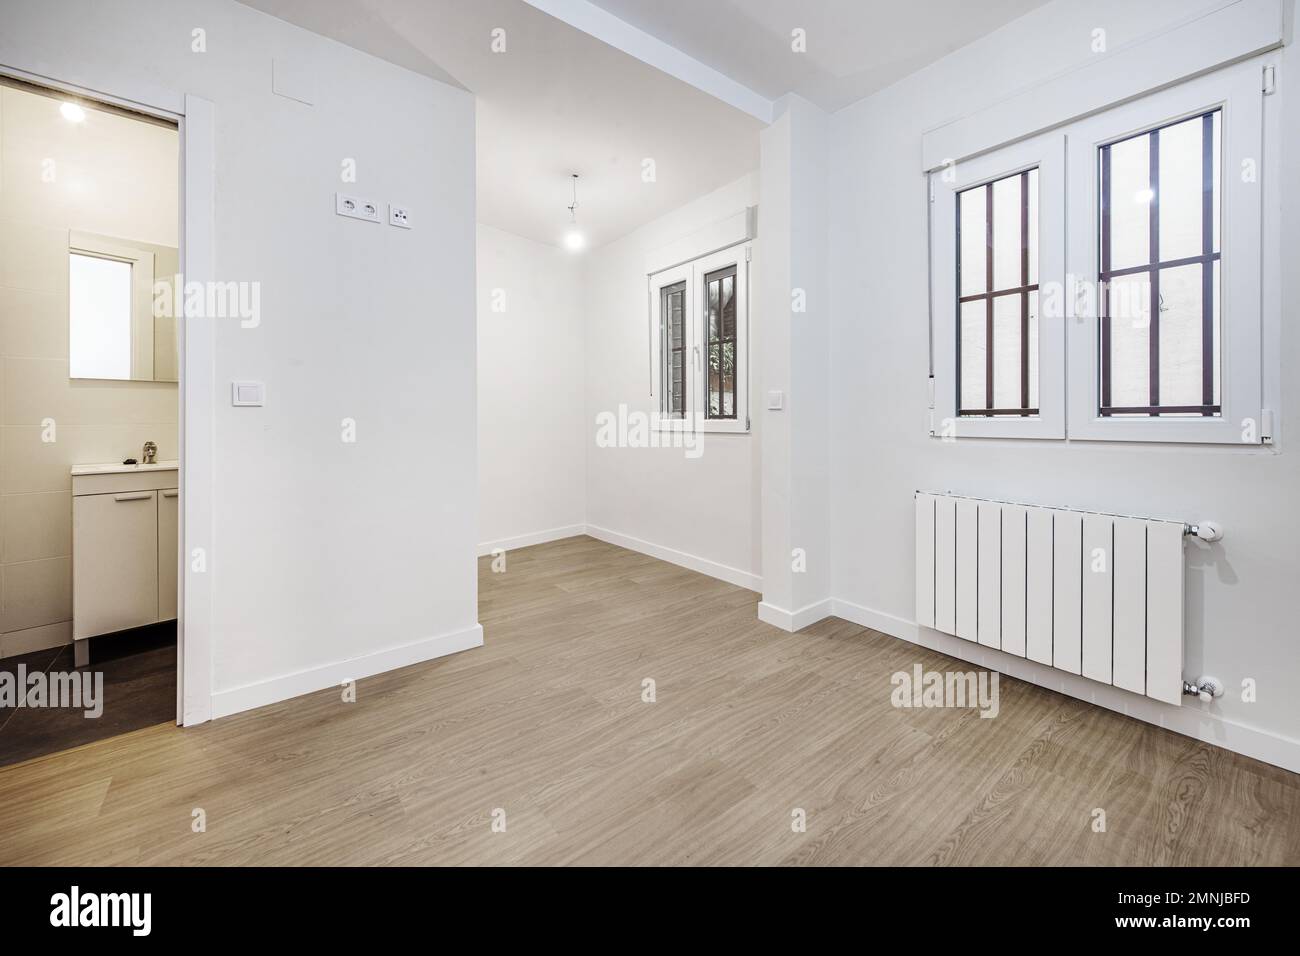 Empty room with laminate flooring, access to an en-suite bathroom and white aluminum windows with bars Stock Photo